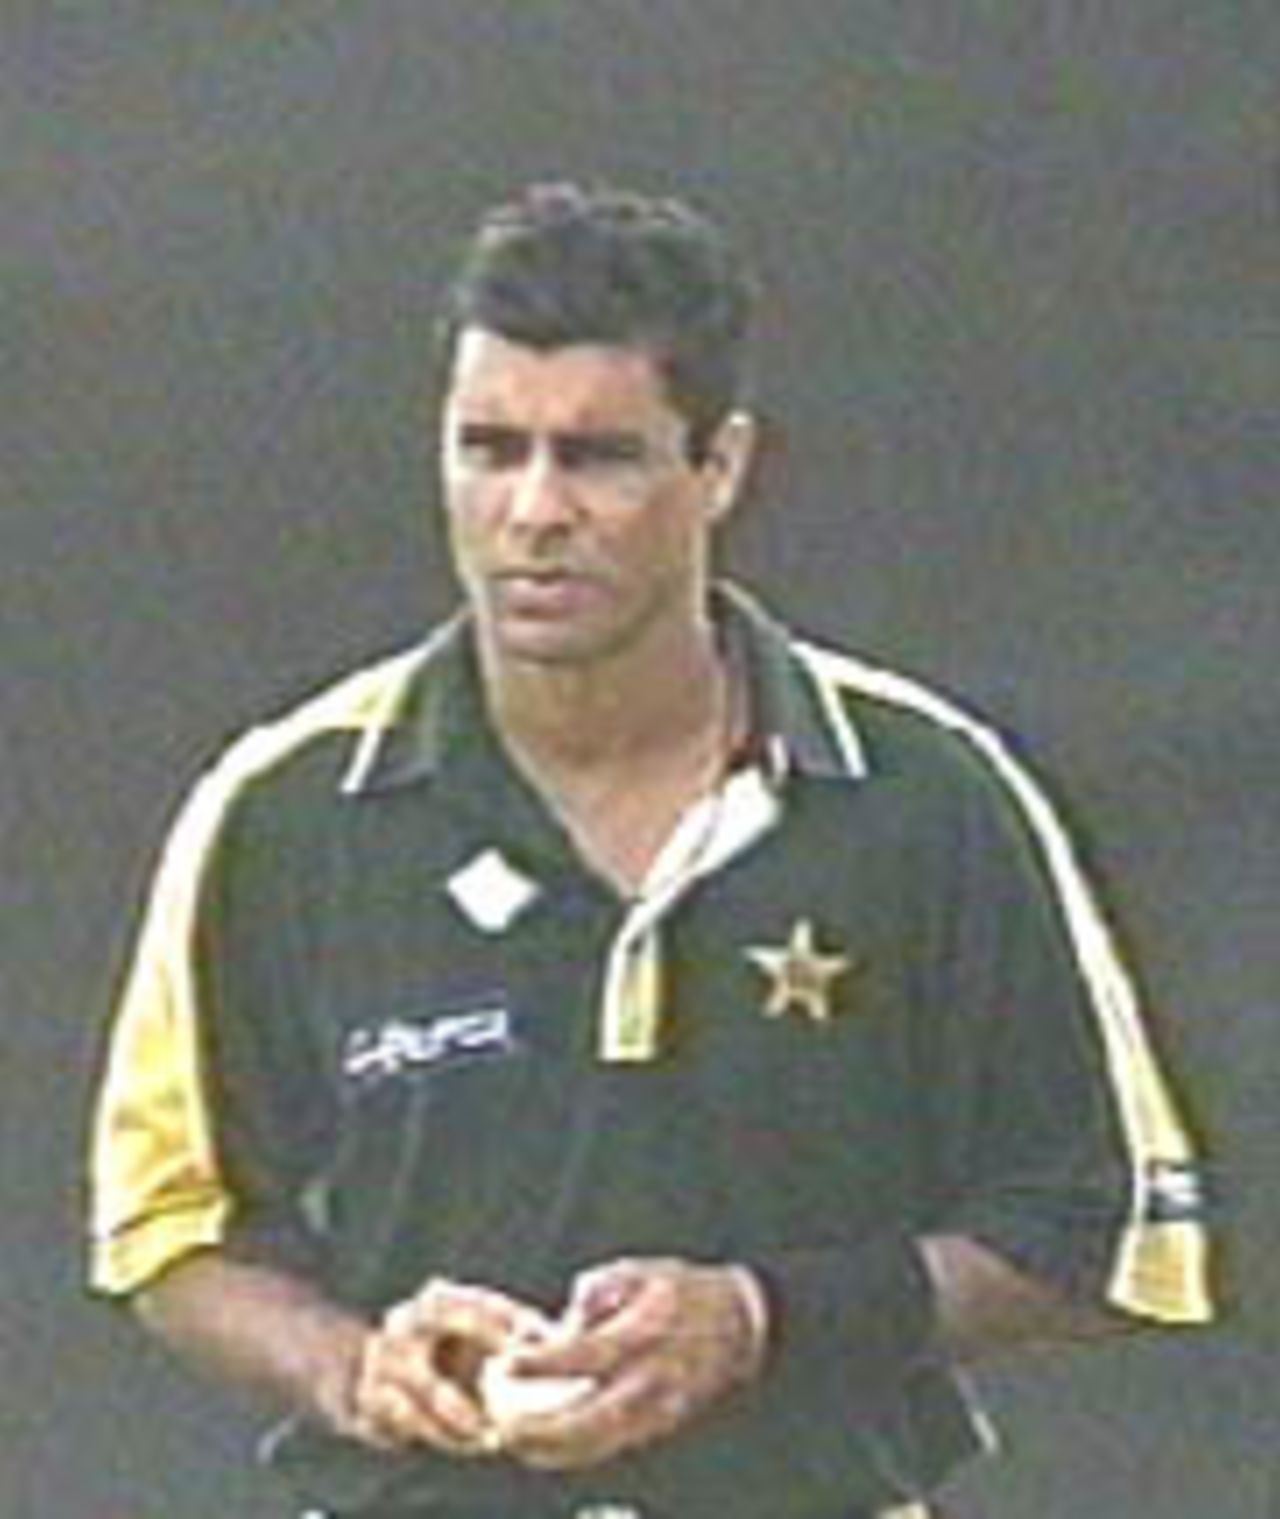 Waqar Younis during the course of the 3rd one-day match in the Singer Triangular Series in Colombo on 8th July 2000.